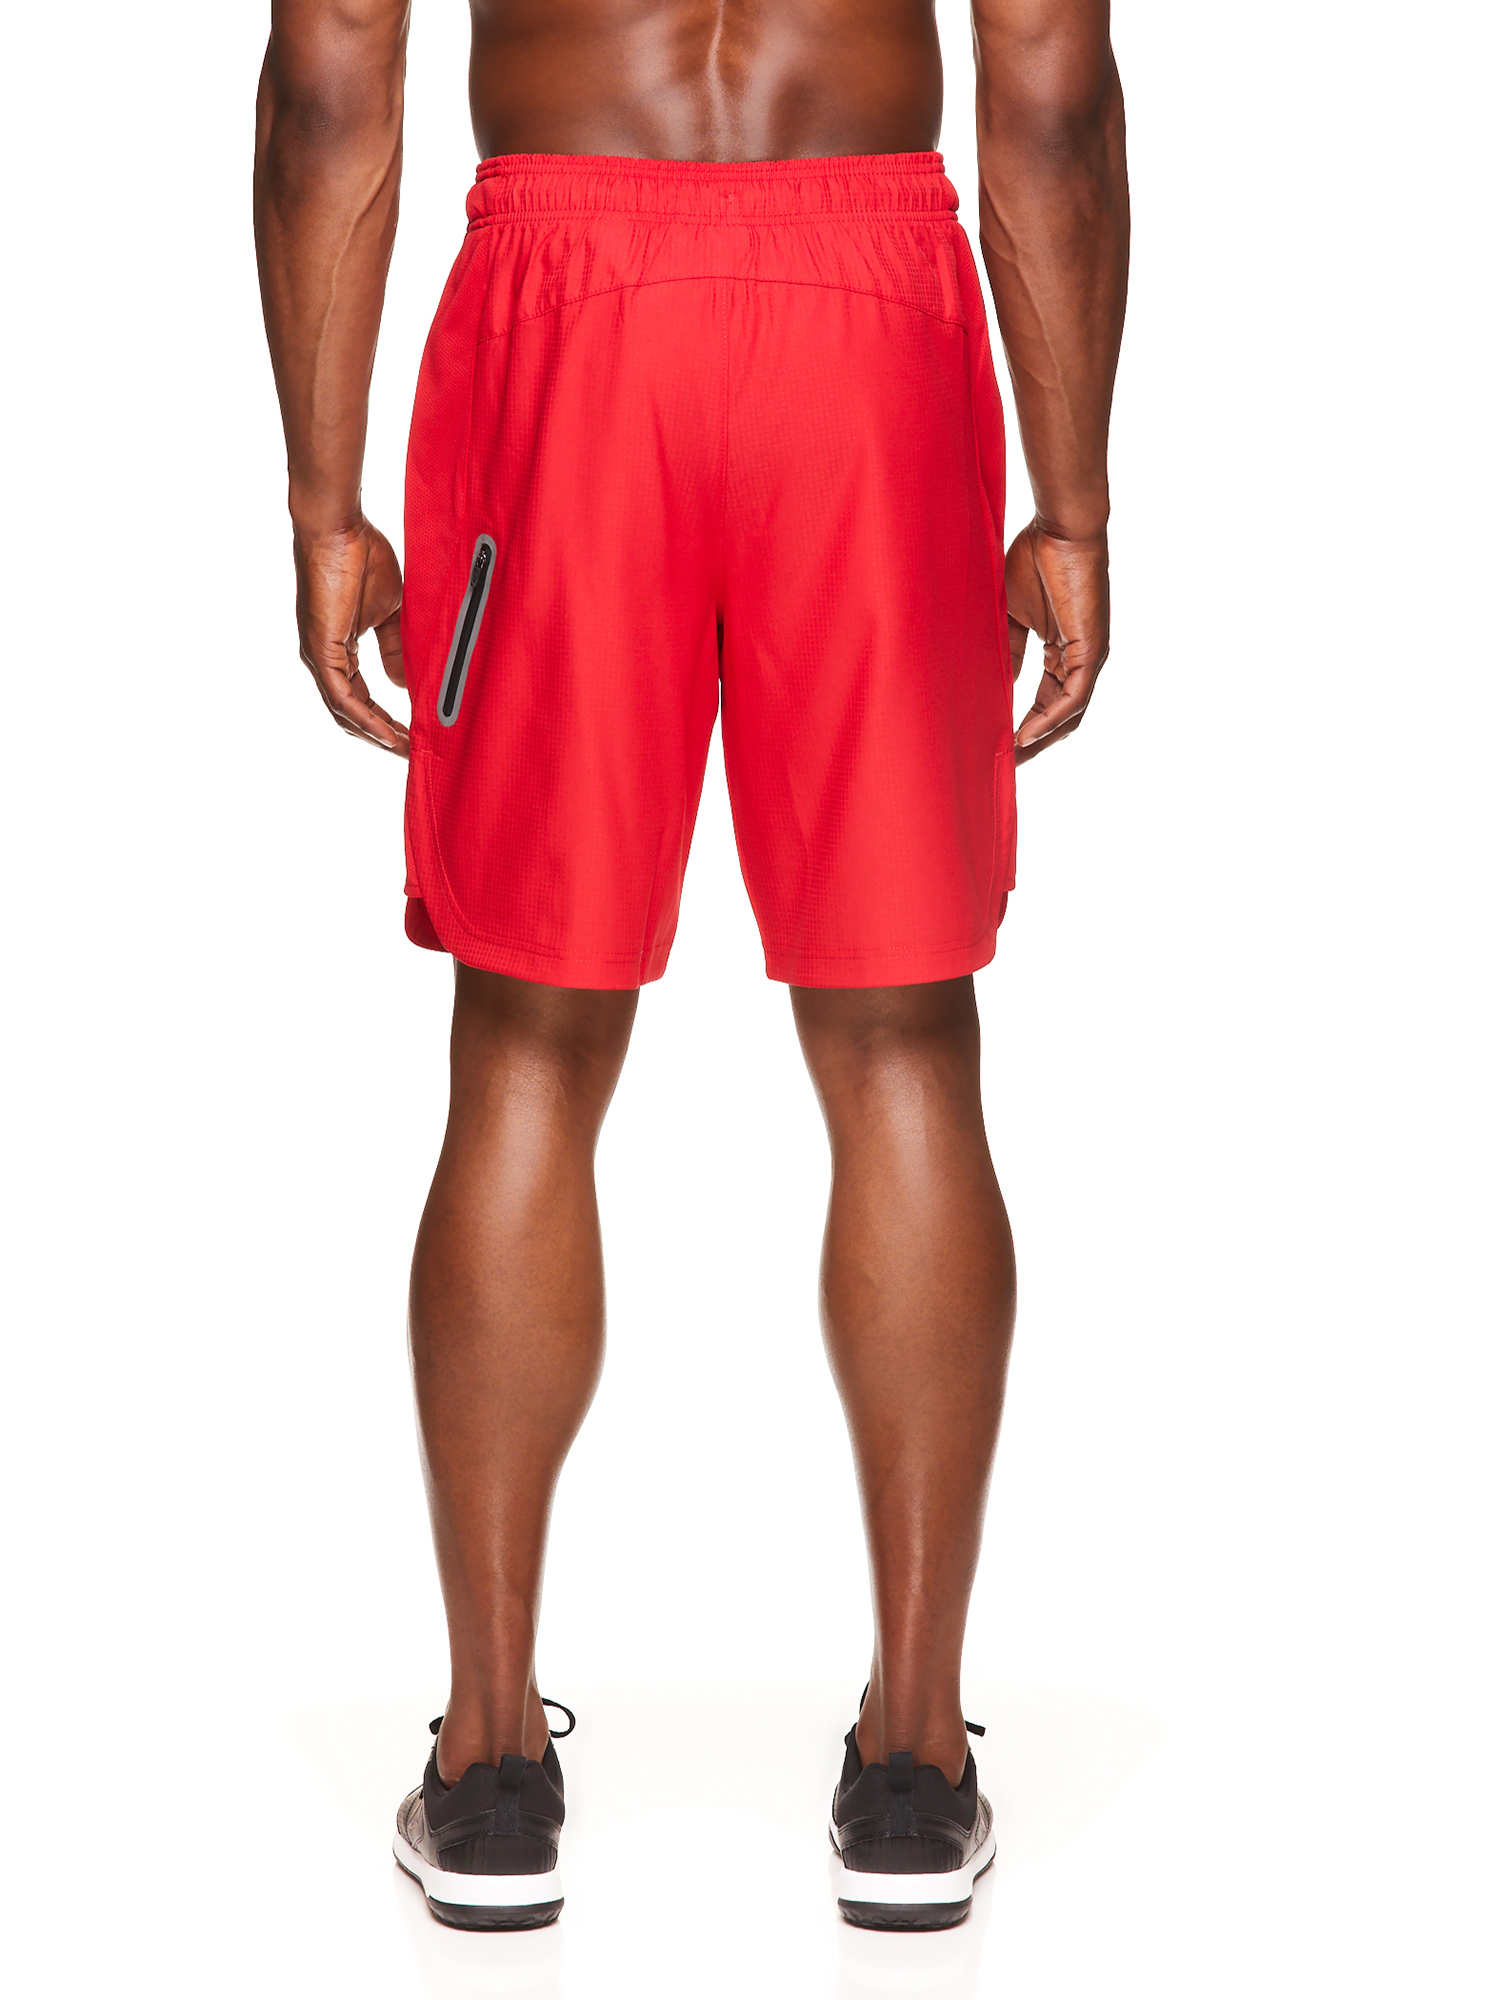 Reebok Men's and Big Men's Active Textured Woven Shorts, 9" Inseam, up to Size 3XL - image 2 of 4